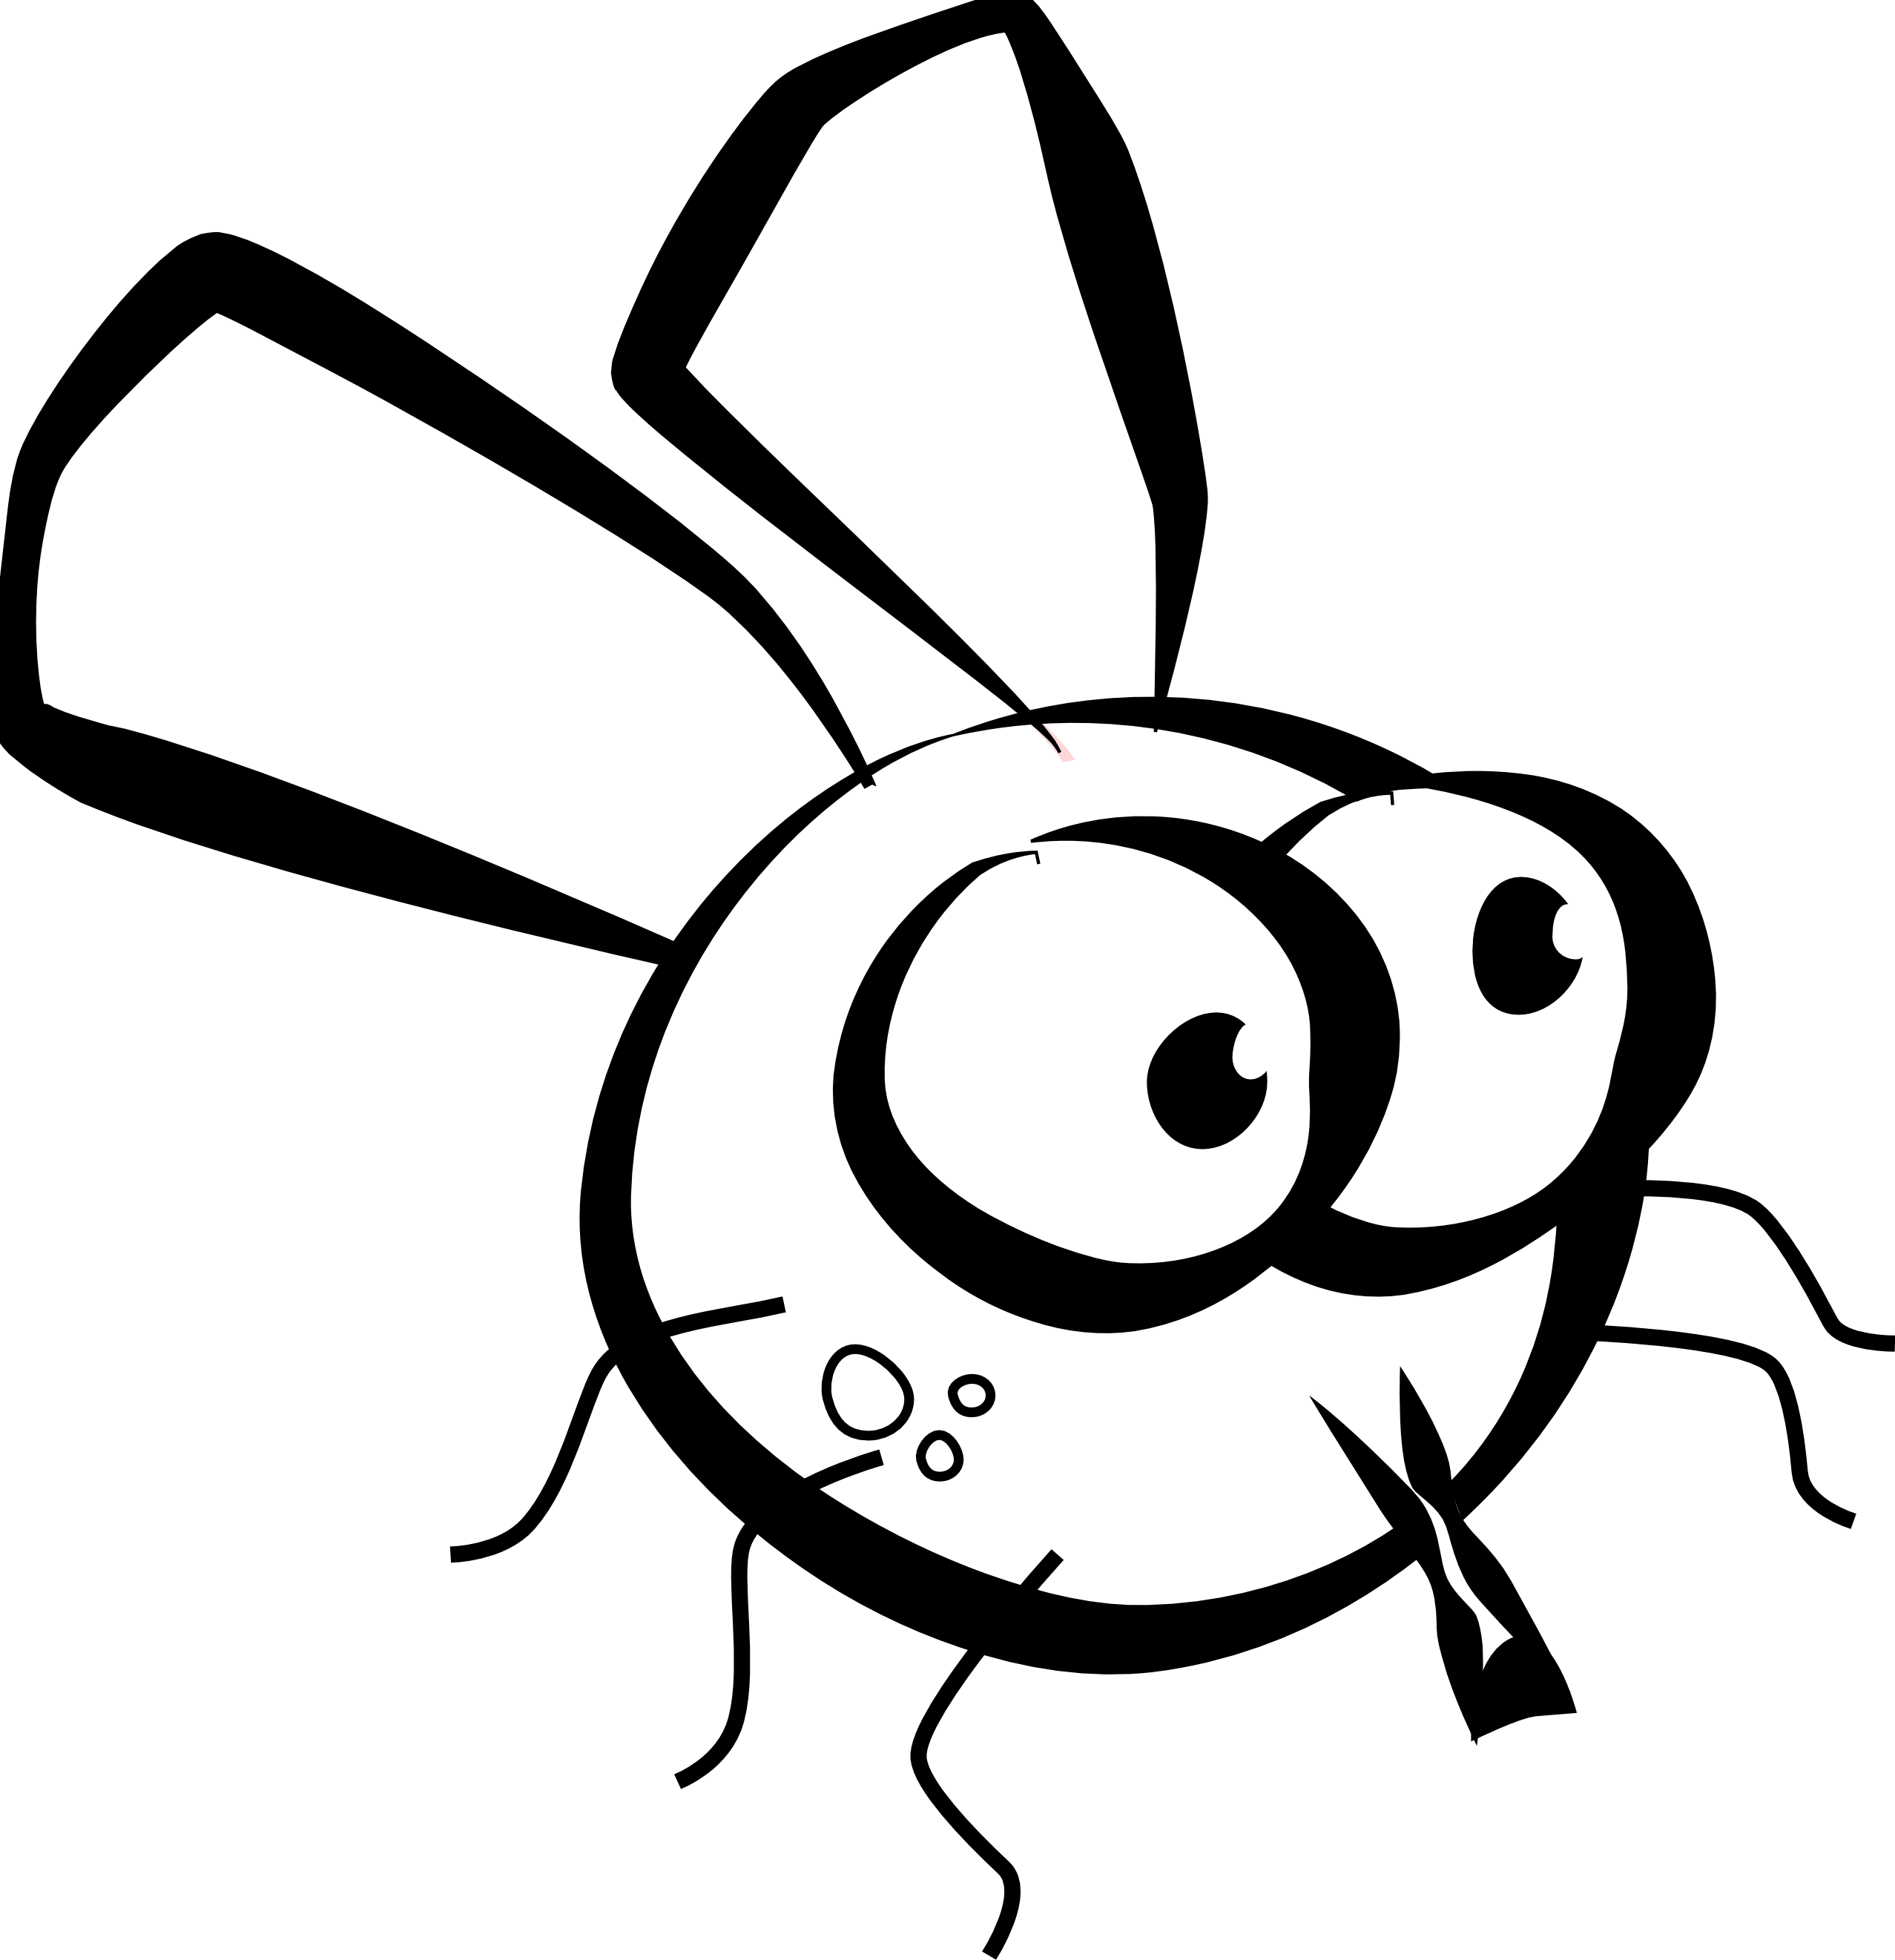 clipart of fly - photo #28